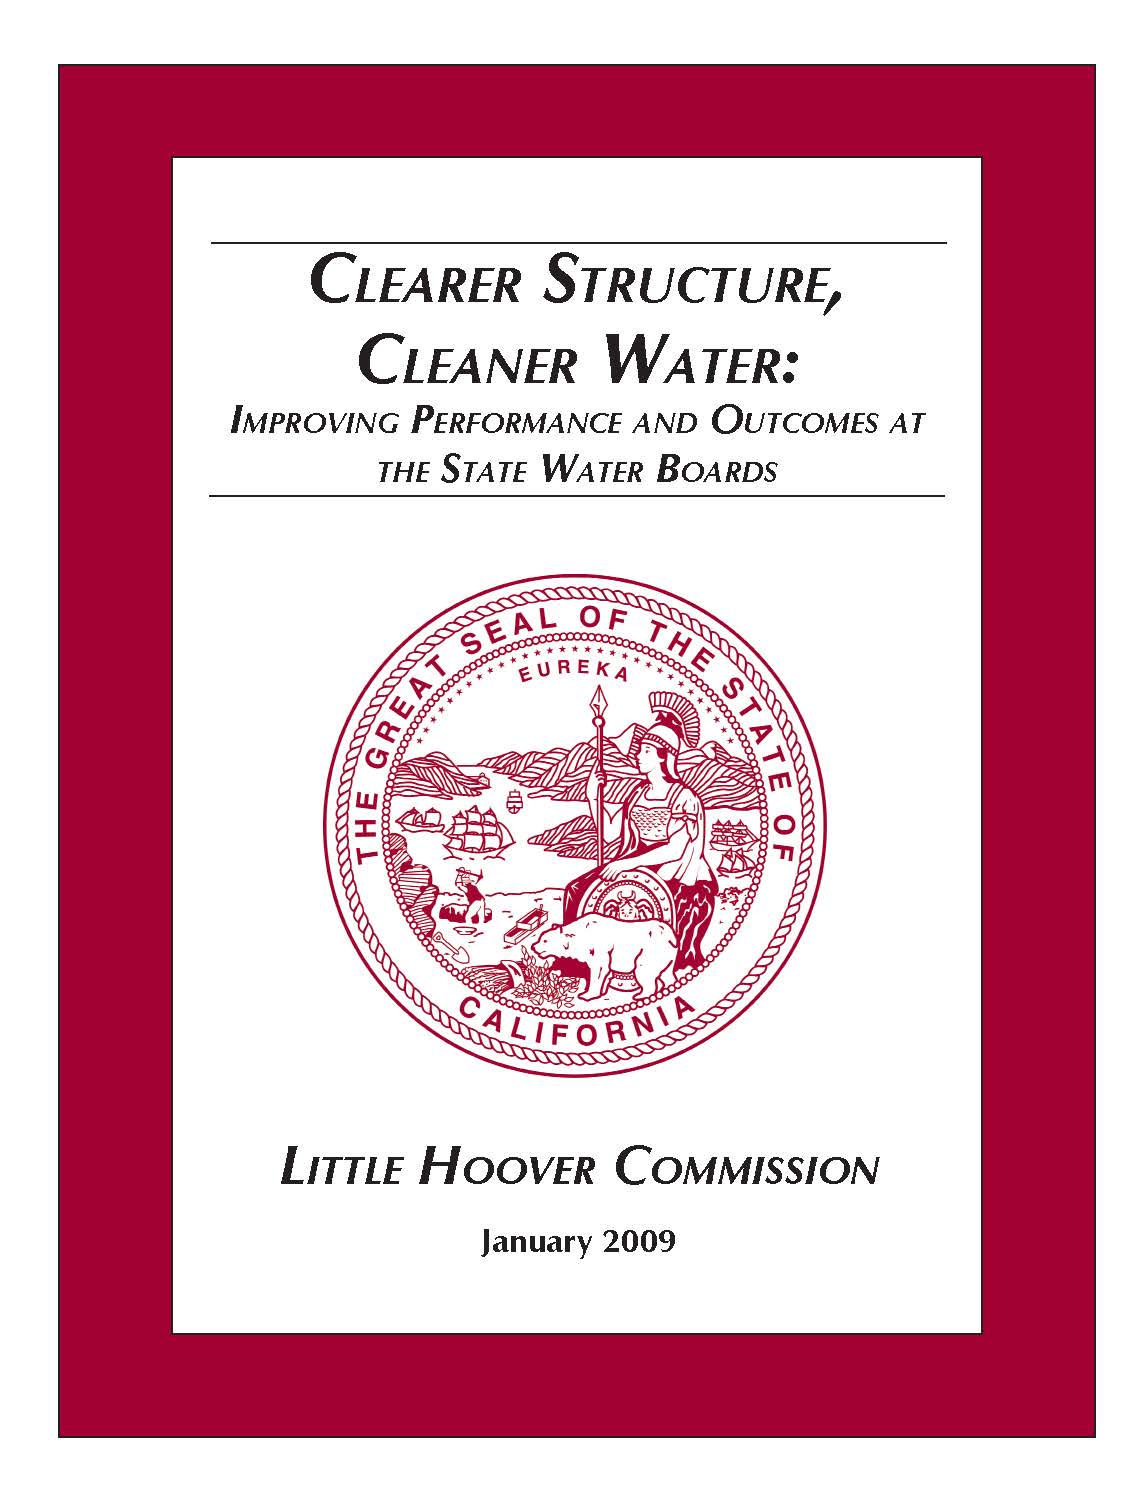 Clearer Structure, Cleaner Water: Improving Performance and Outcomes at the State Water Boards